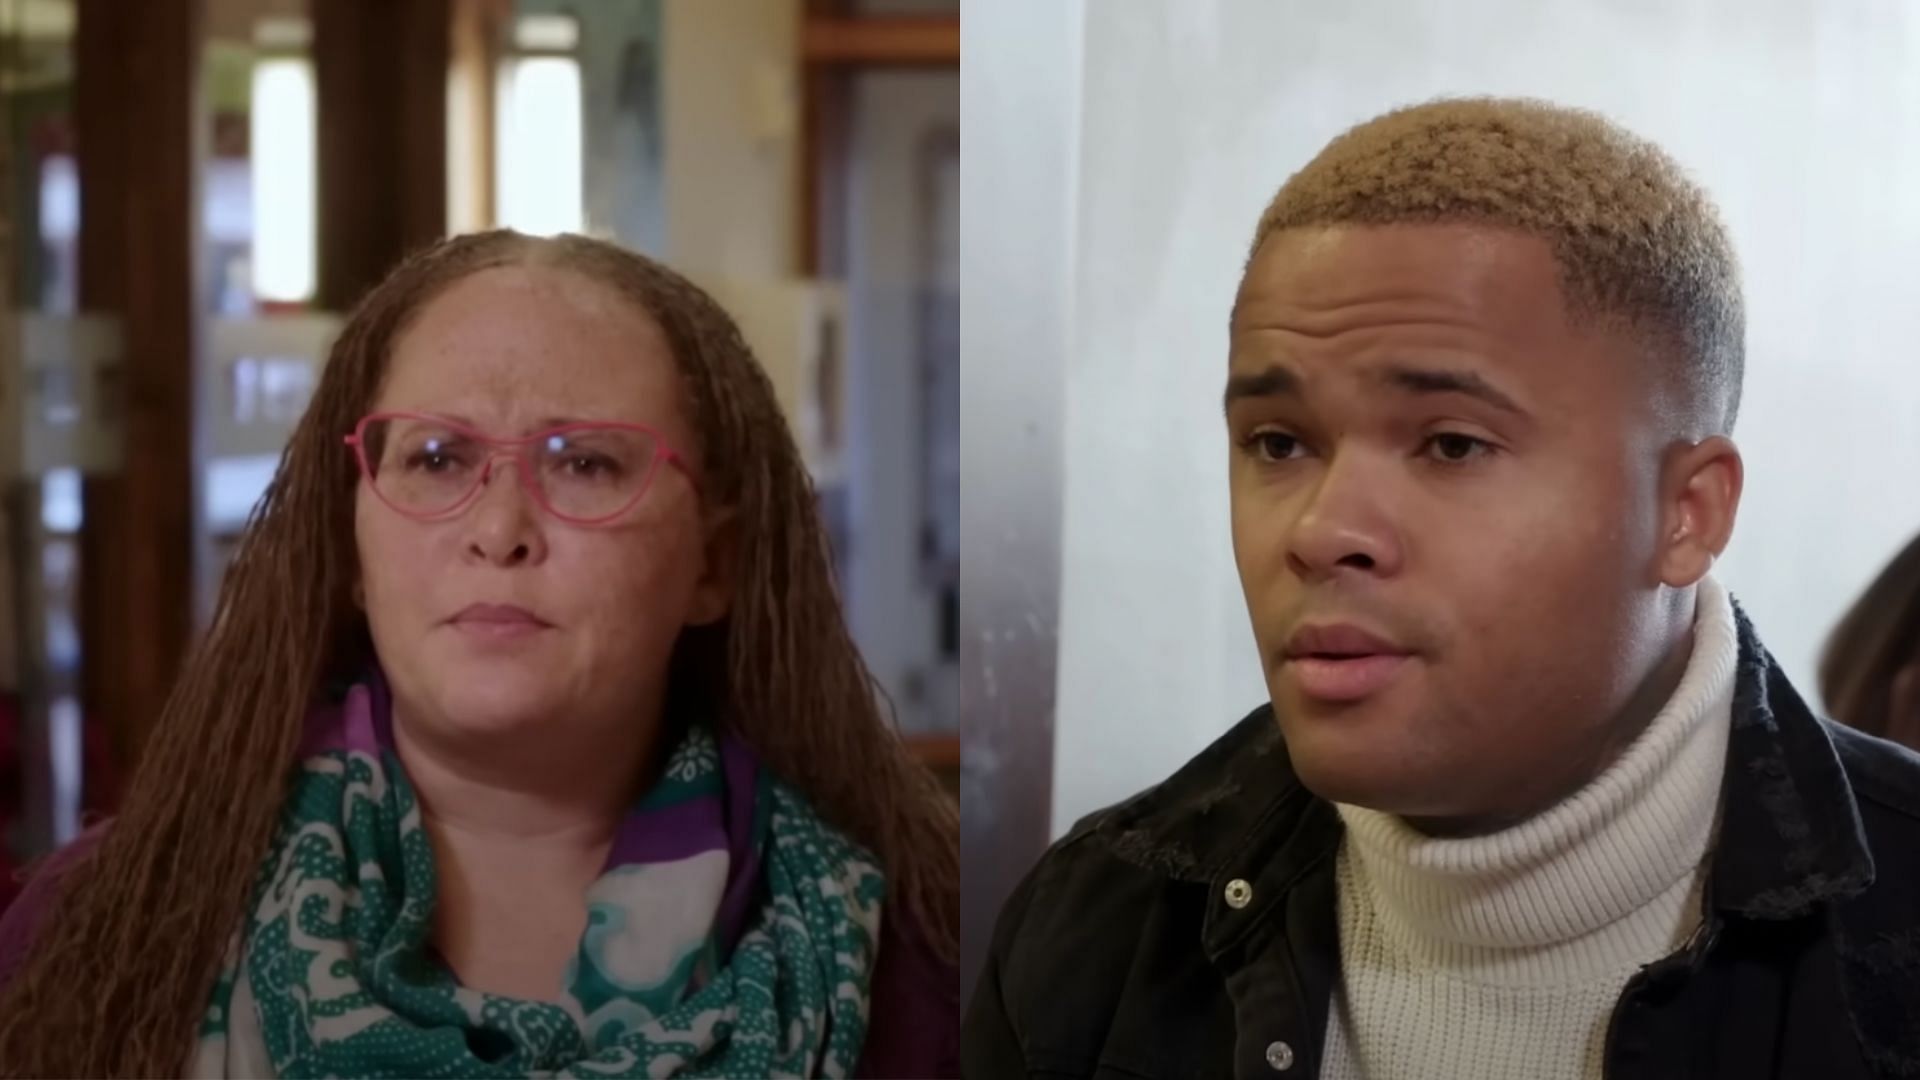 Jibri Bell&#039;s mother will not attend her son&#039;s wedding in 90 Day Fianc&eacute; (Image via TLC)